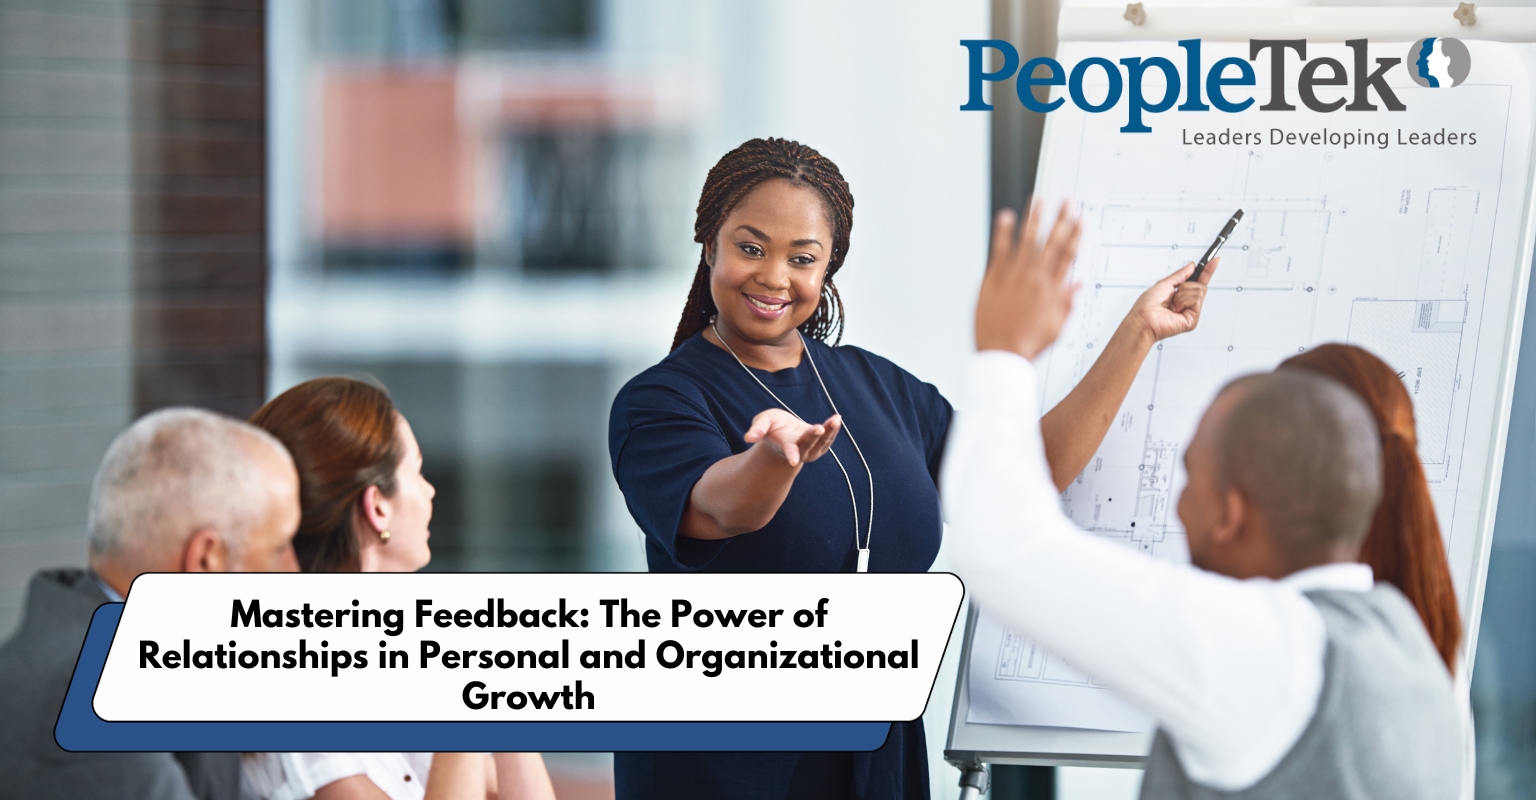 Effective Feedback: Strengthening Growth Through Relationships